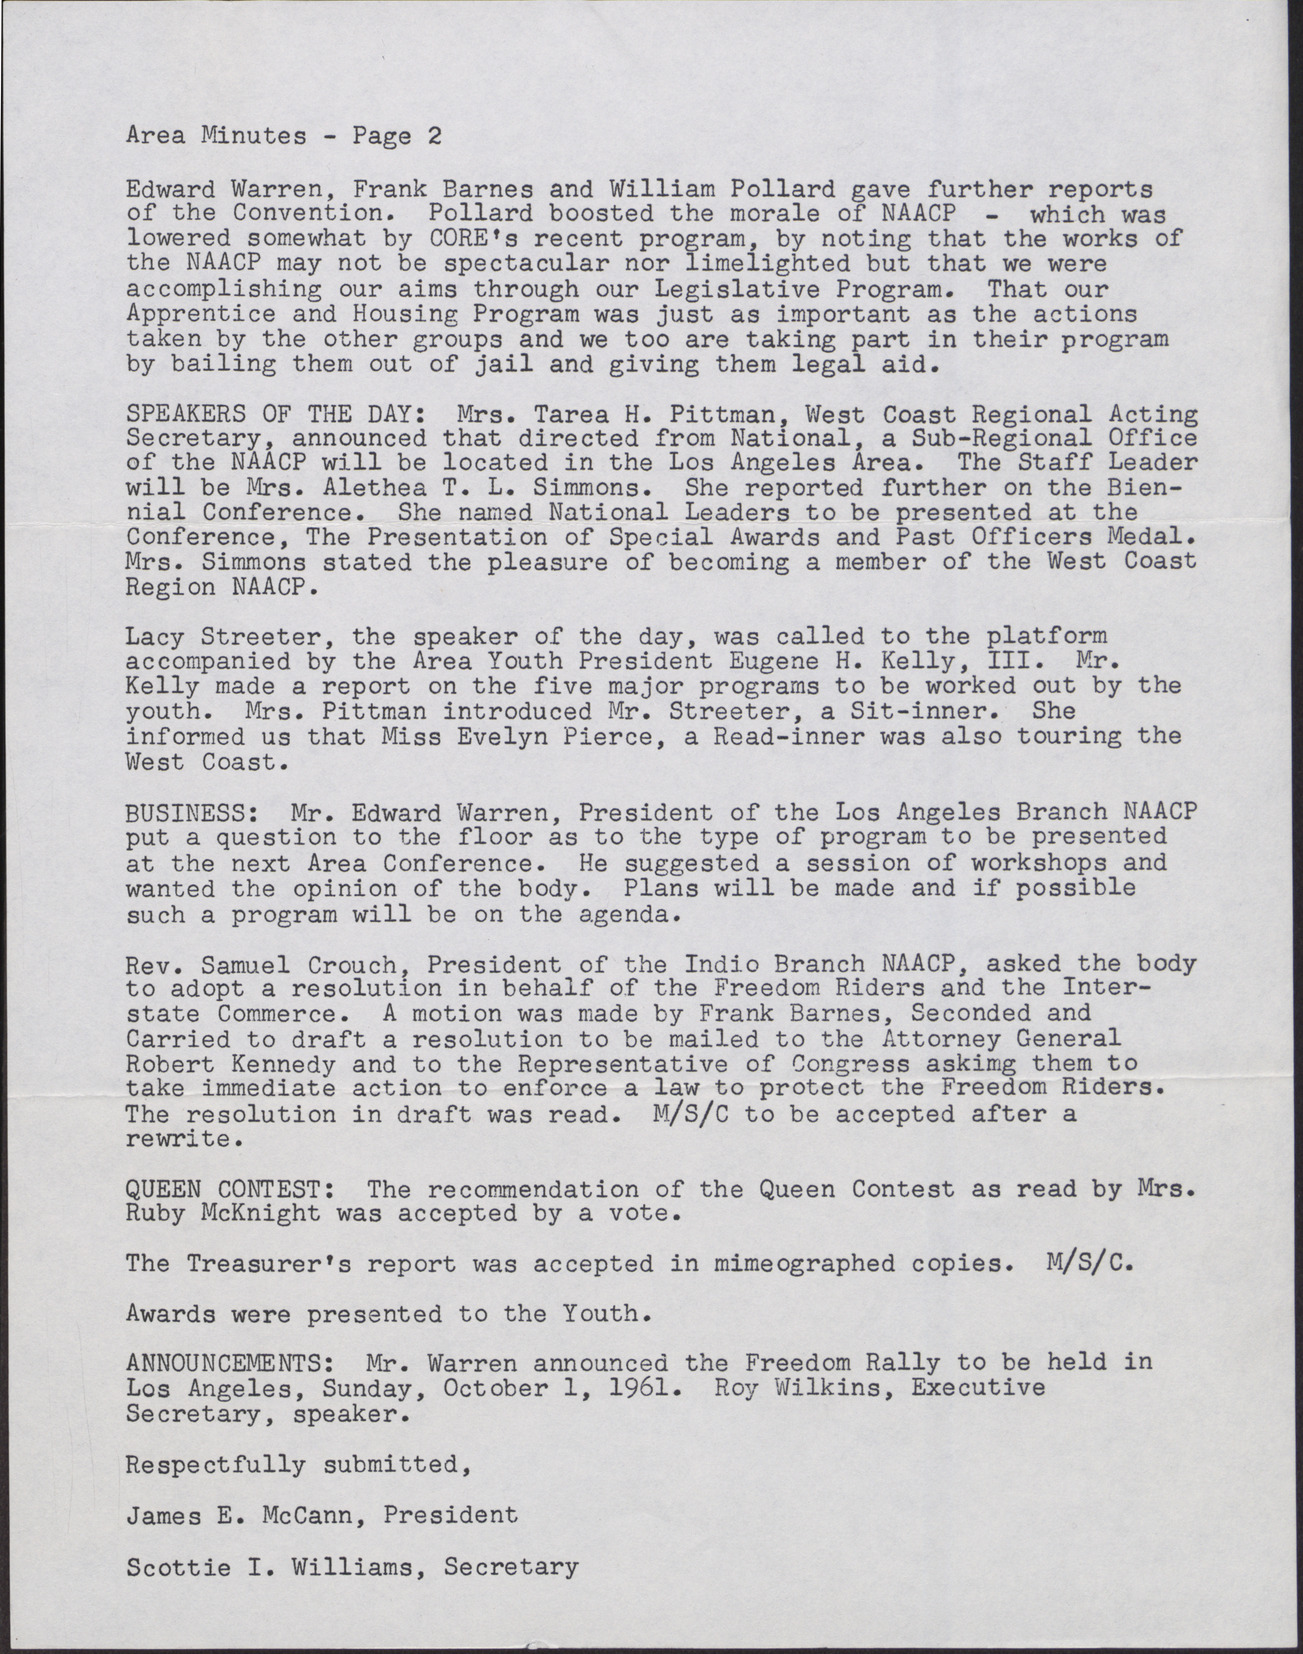 Minutes of the NAACP Third Quarterly Area Meeting of the Southern Area Conference (2 pages), August 19, 1961, page 2